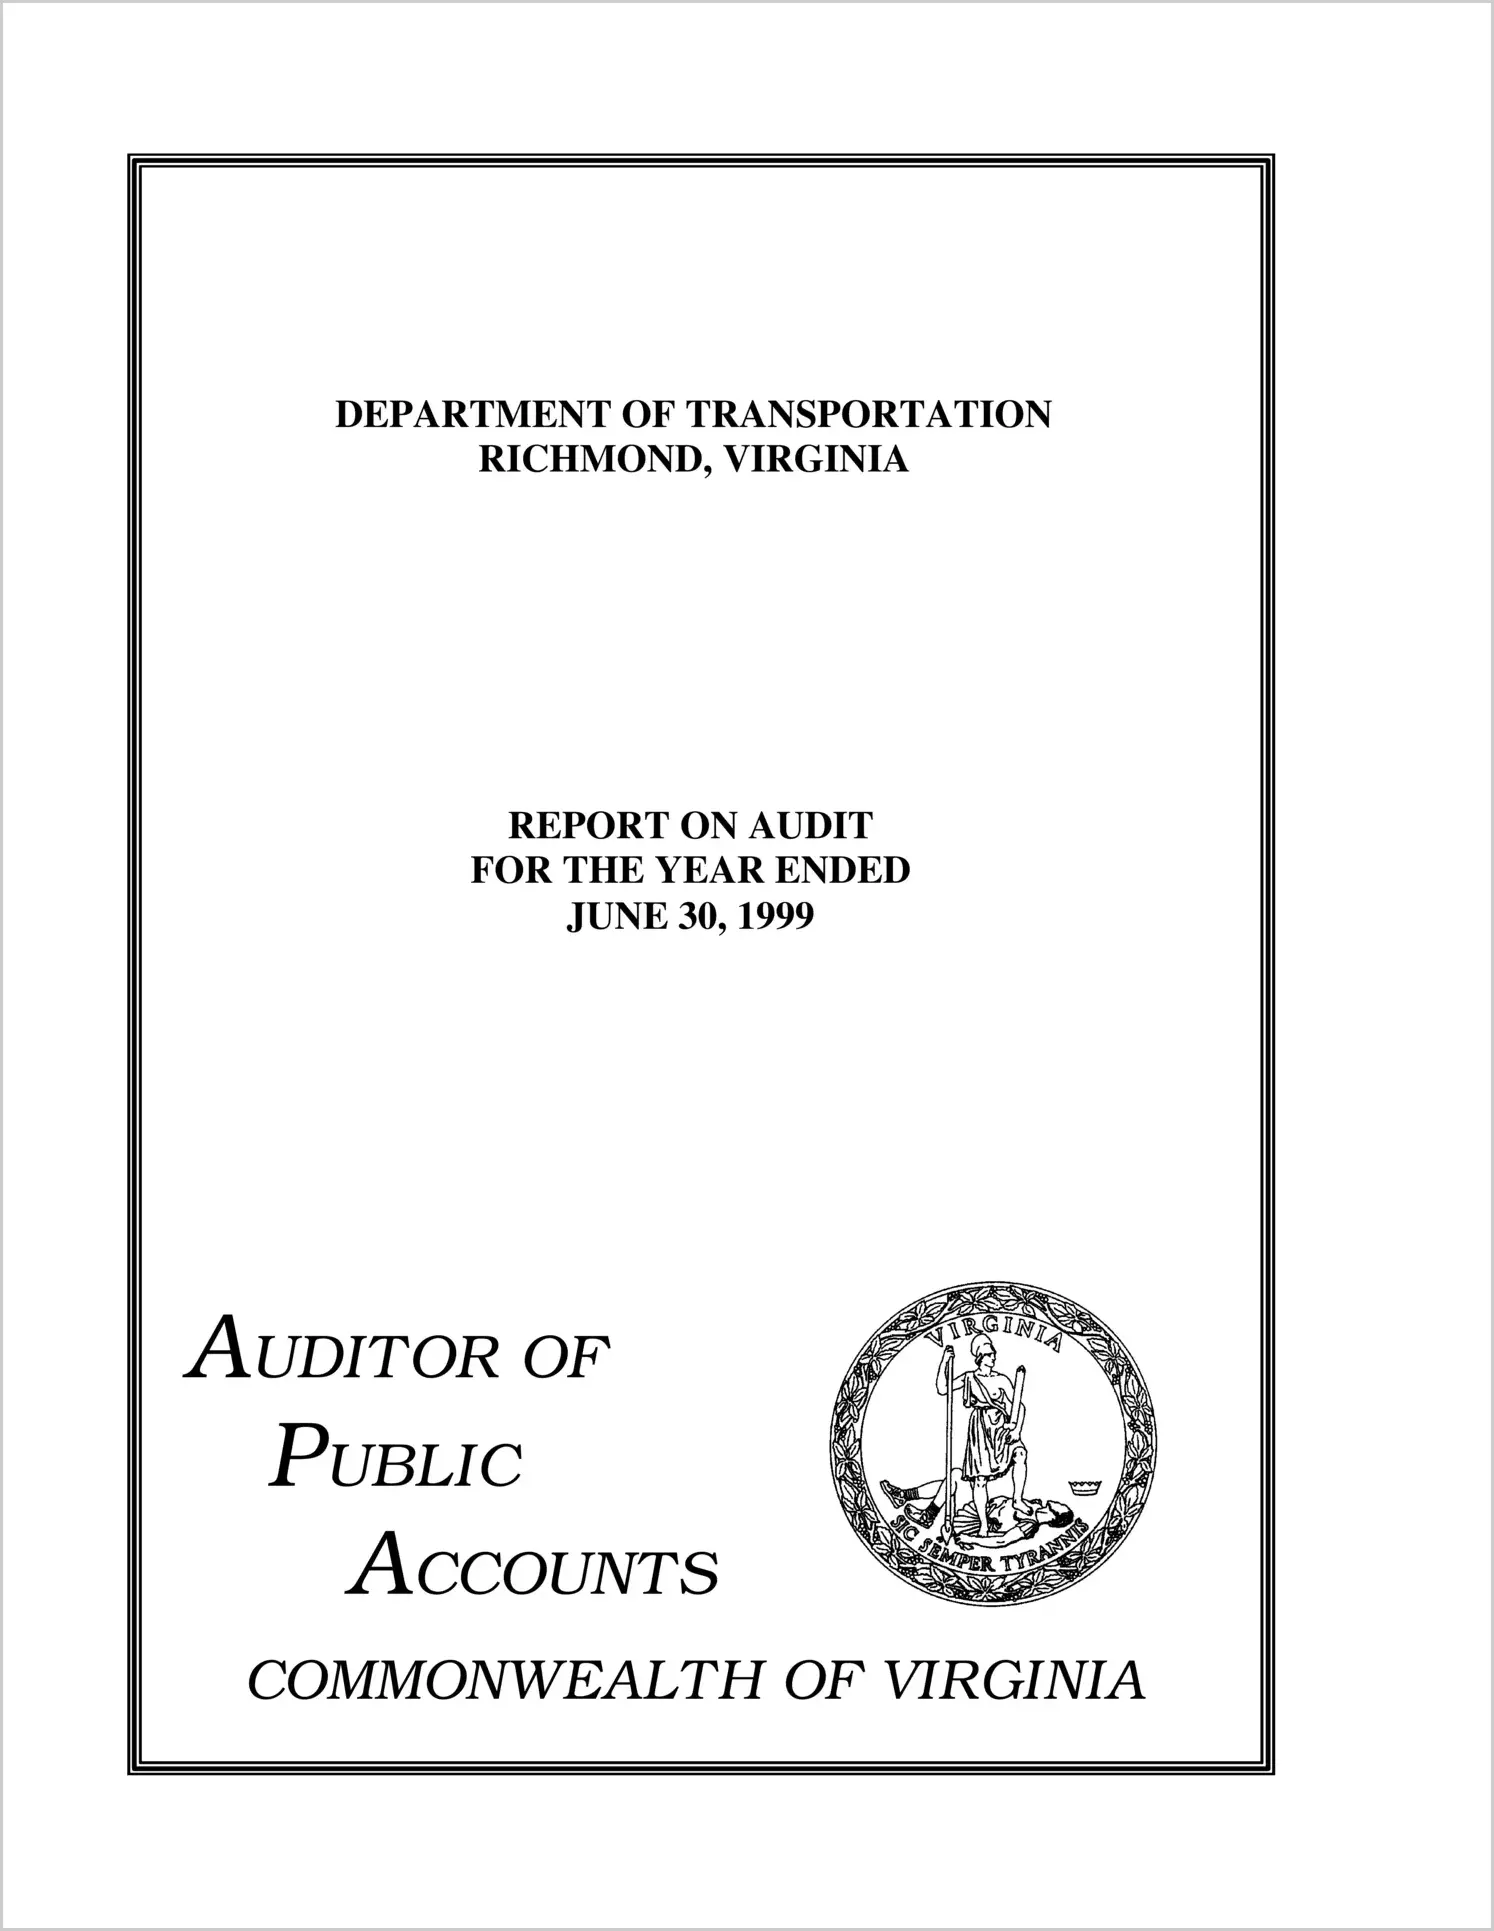 Department of Transportation for the year ended June 30, 1999